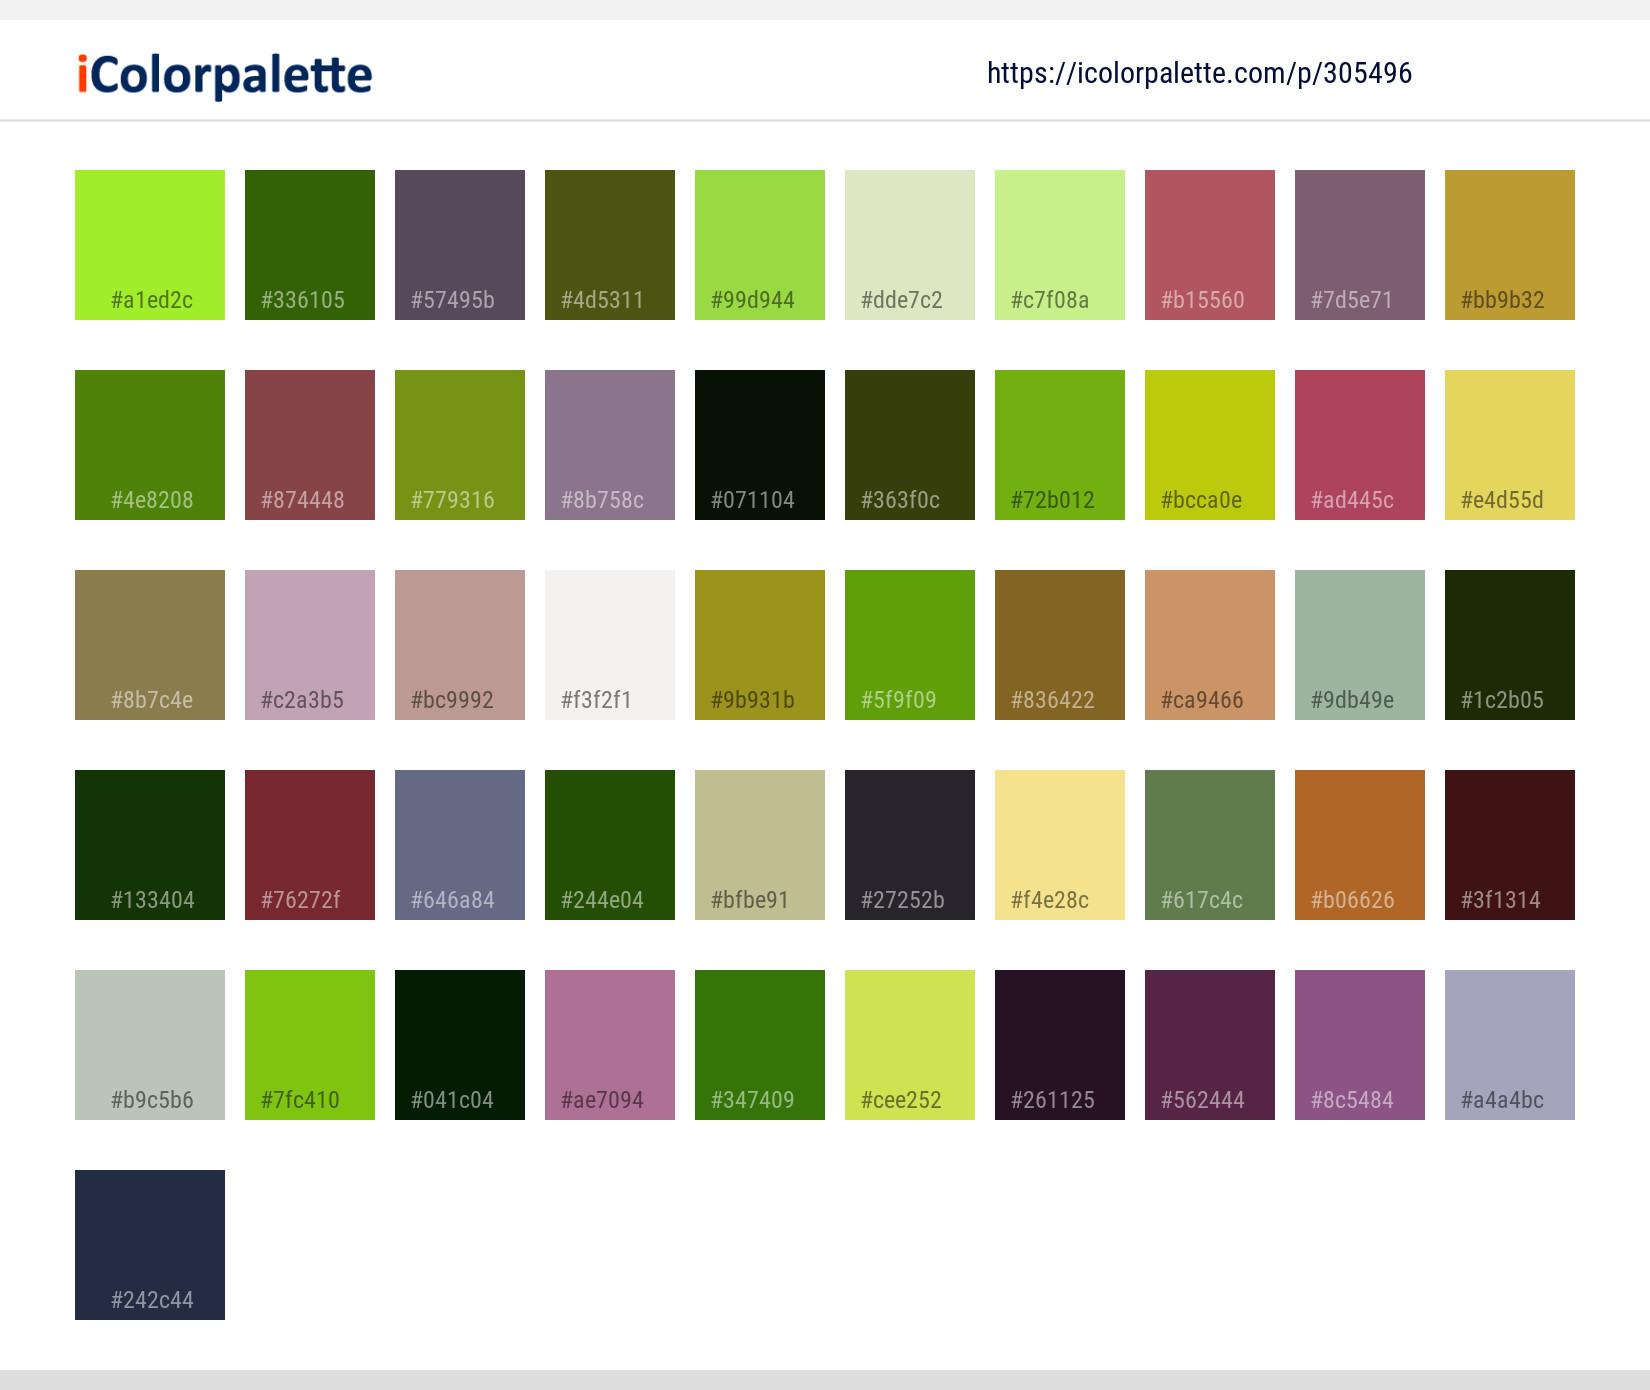 find image with color palette